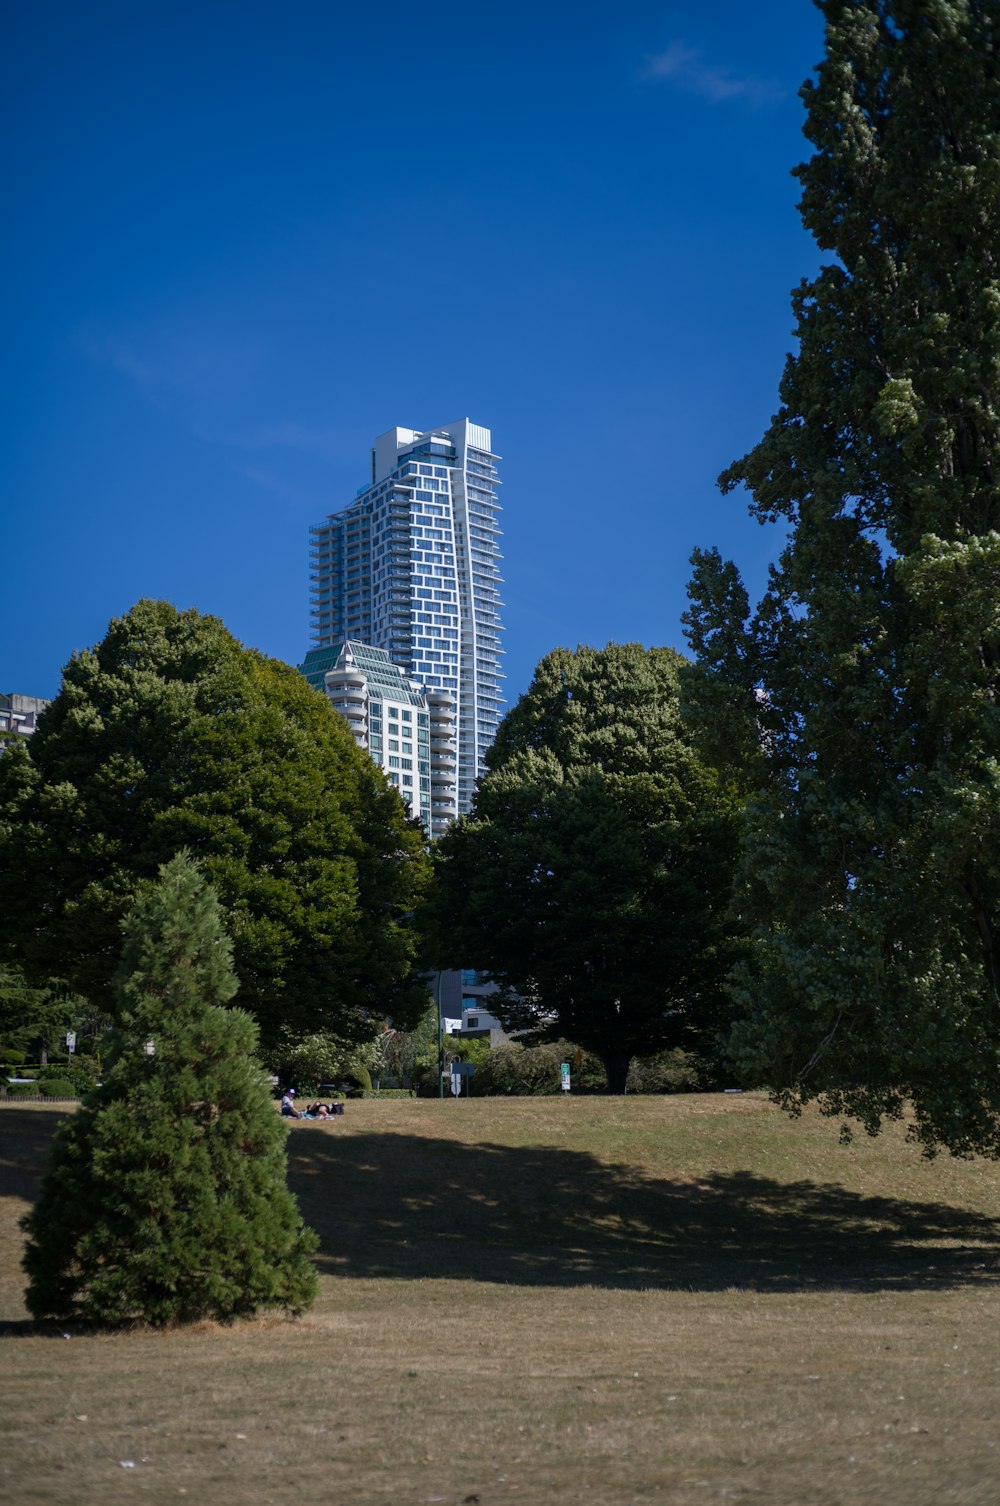 a park with trees and a tall building in the background